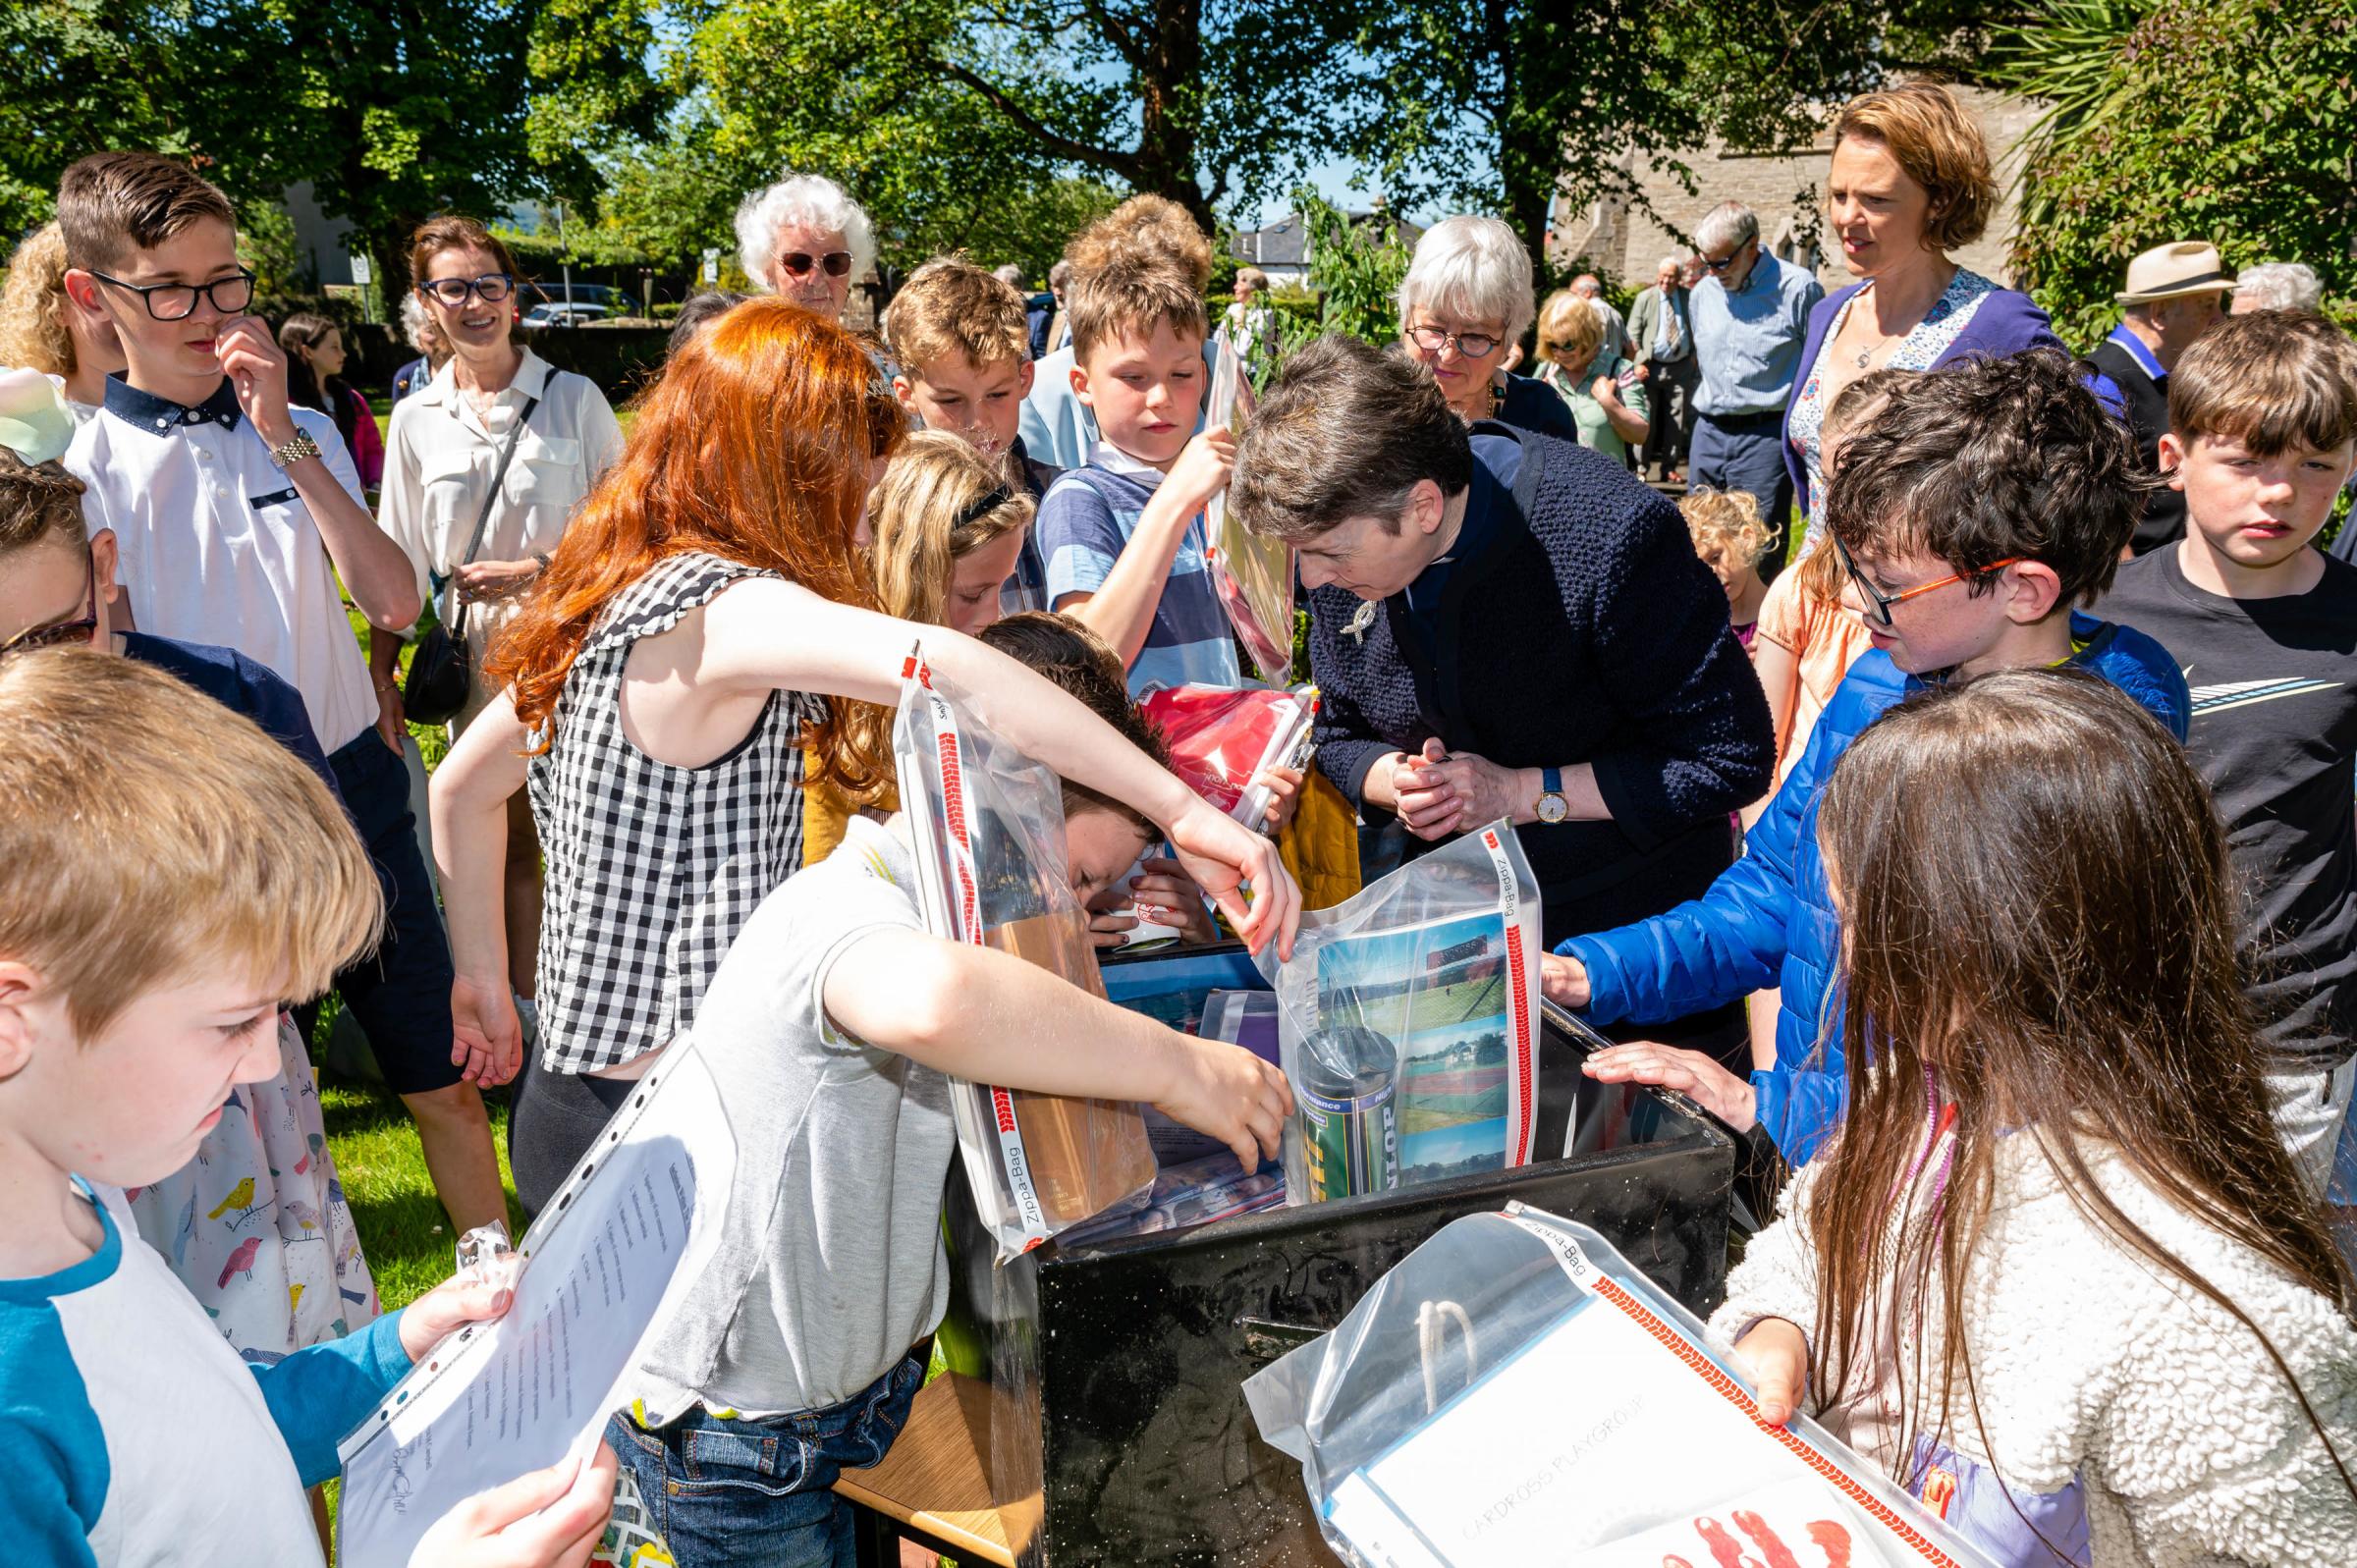 Cardross Millennium Time Capsule Opened. As part of their 150th Anniversary celebrations the time capsule which was buried in the grounds of the church in 2000 was opened. The children of todays church were able to see glimpses of village life 22 years